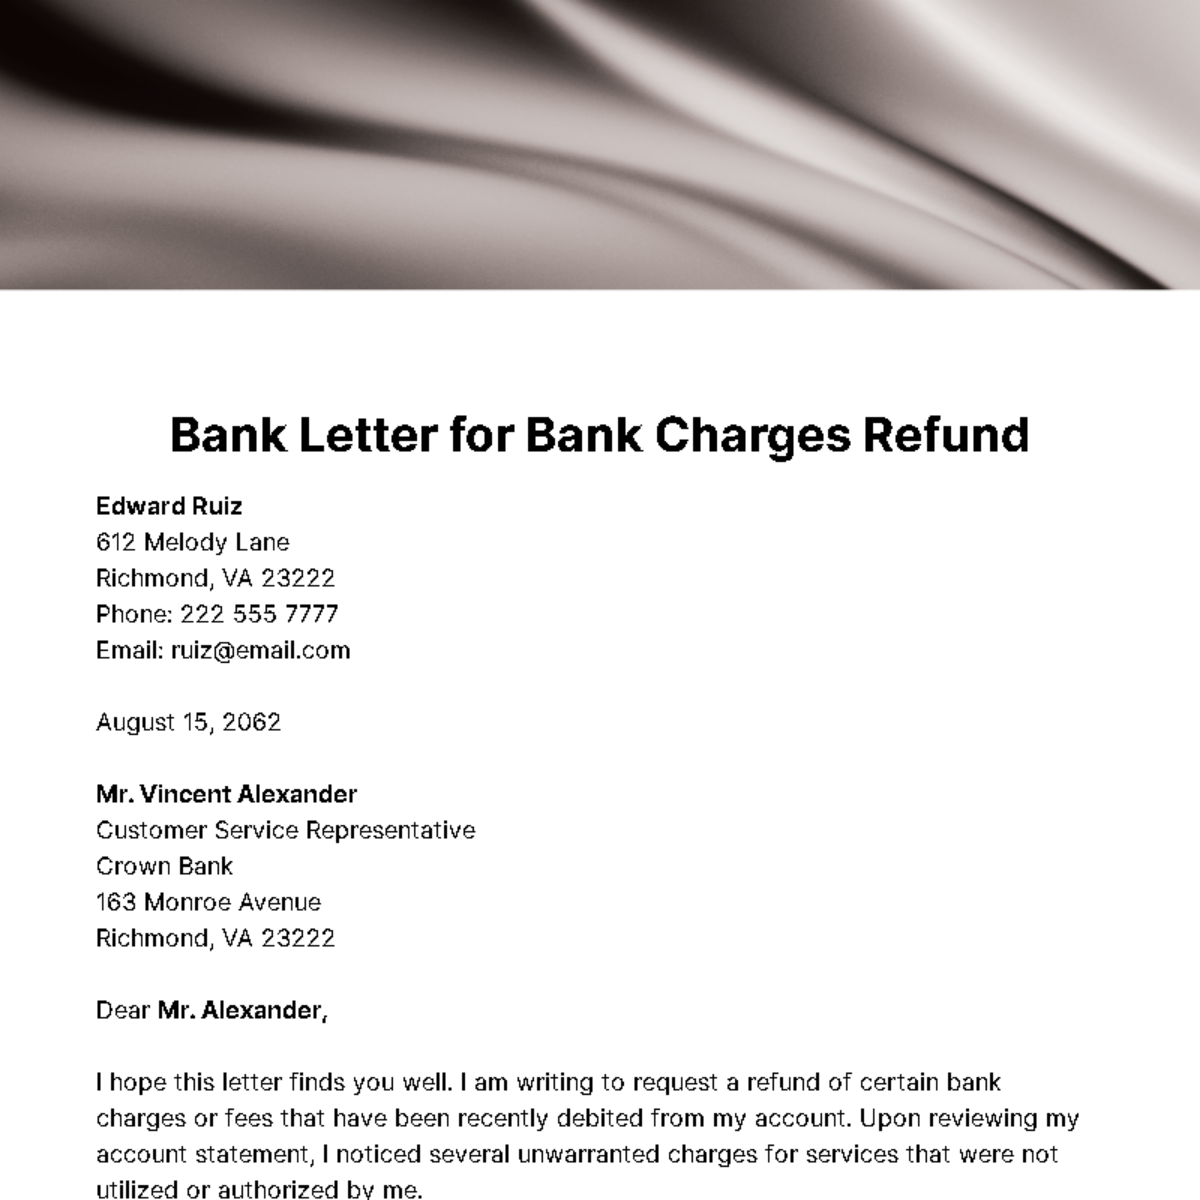 Free Bank Letter for Bank Charges Refund Template